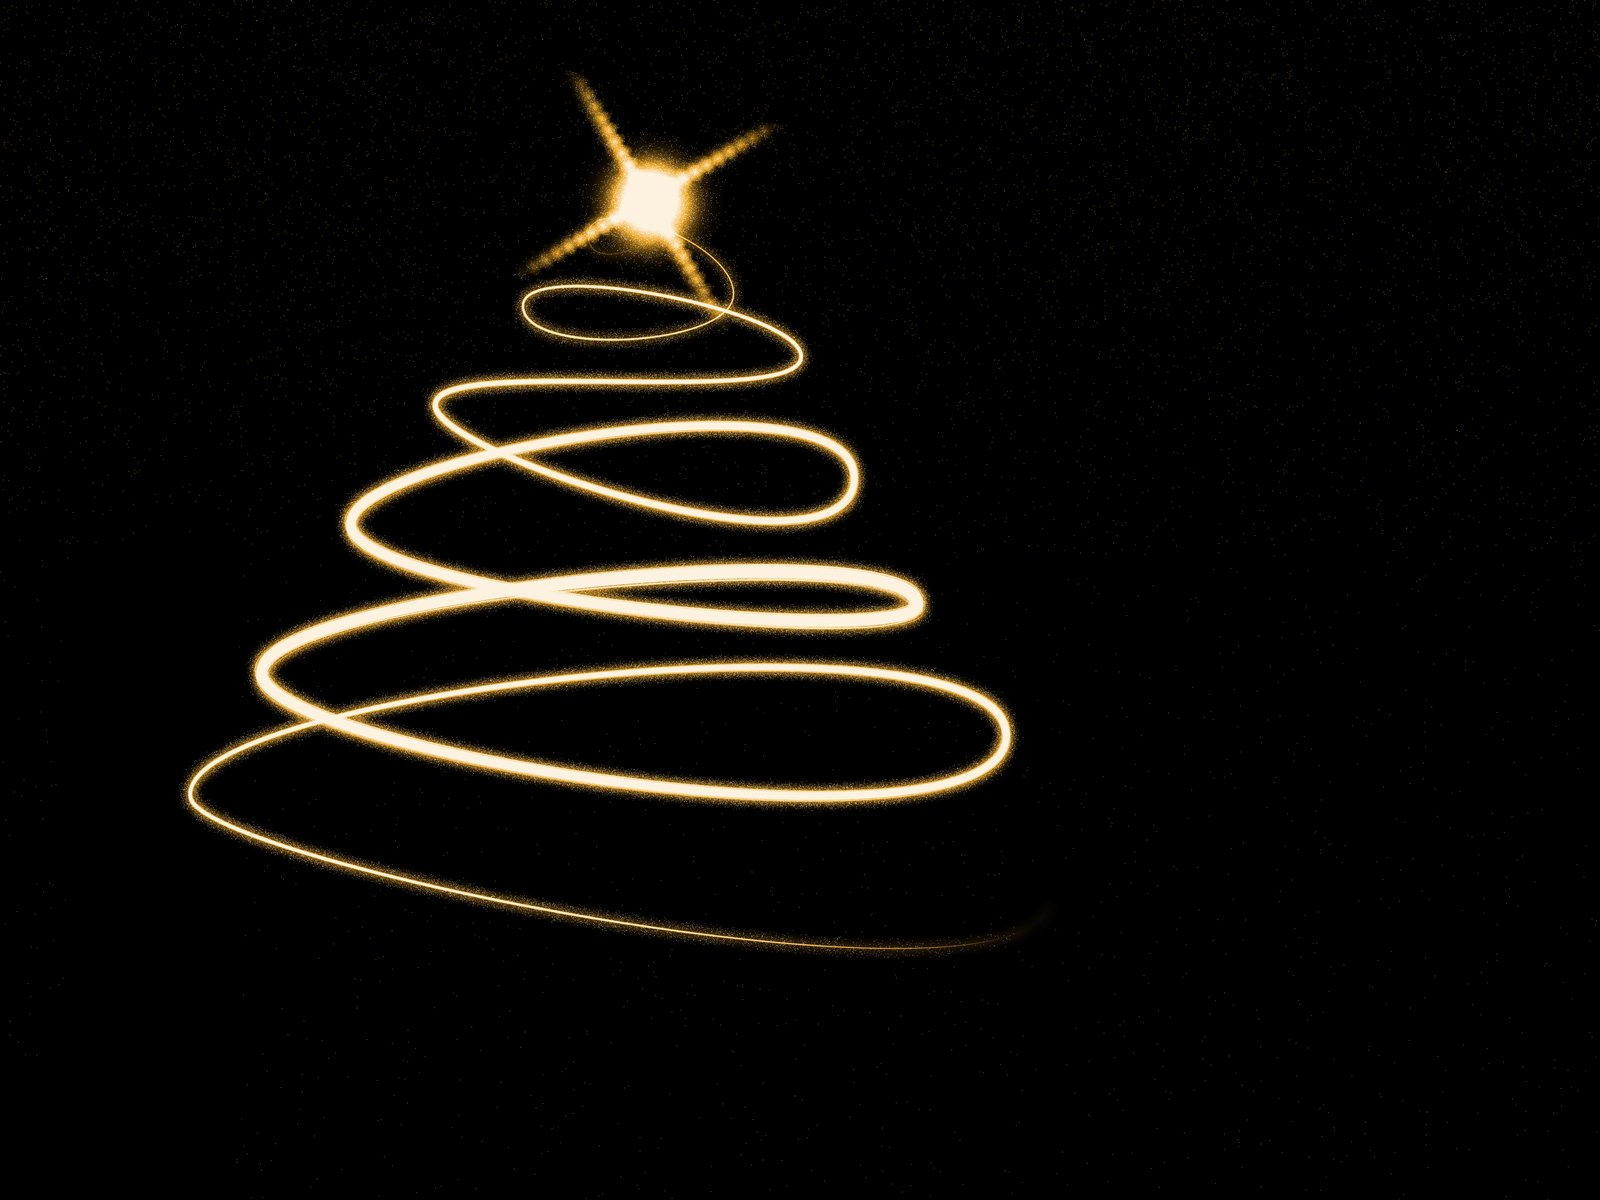 a christmas tree made out of a spirals on a dark background